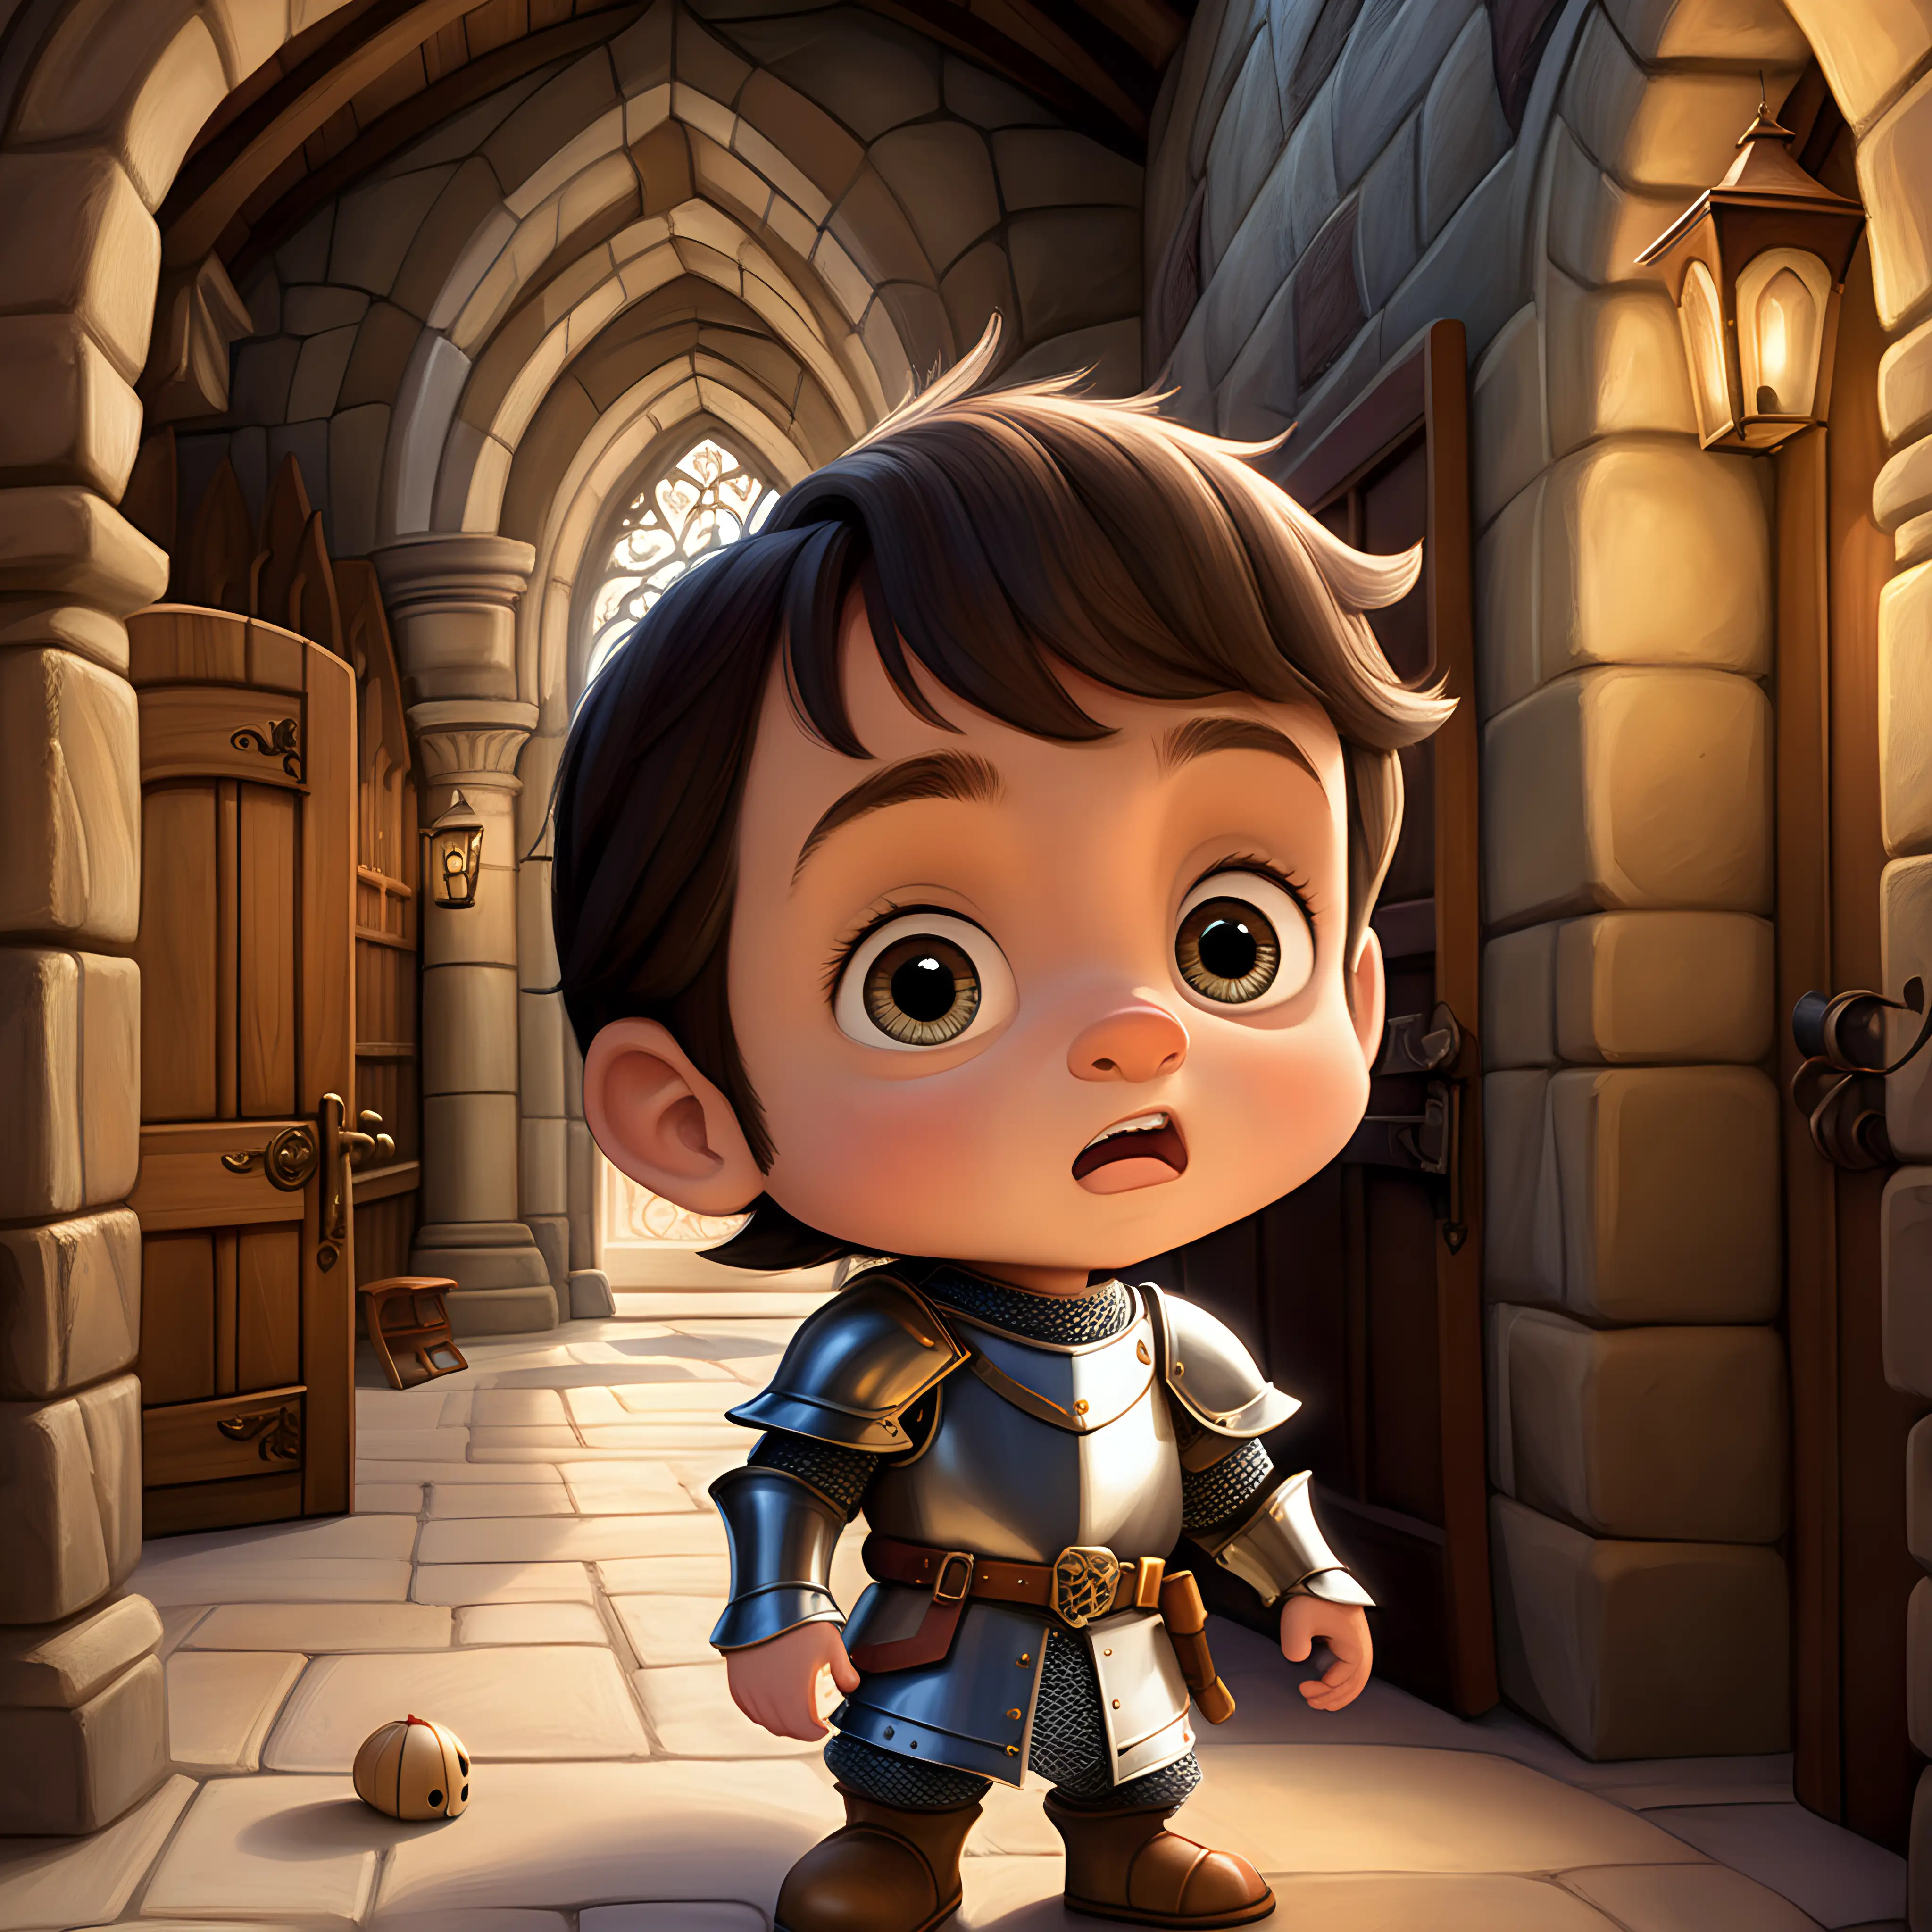 a charming three-year-old prince boy with dark brown hair and adorable big, expressive eyes and slightly protruding ears,hears a scary sound in a medieval setting, there are some wooden toys, The backdrop showcases a picturesque hallway with knight's armors in a palace. Aim for a Pixar-style rendering.